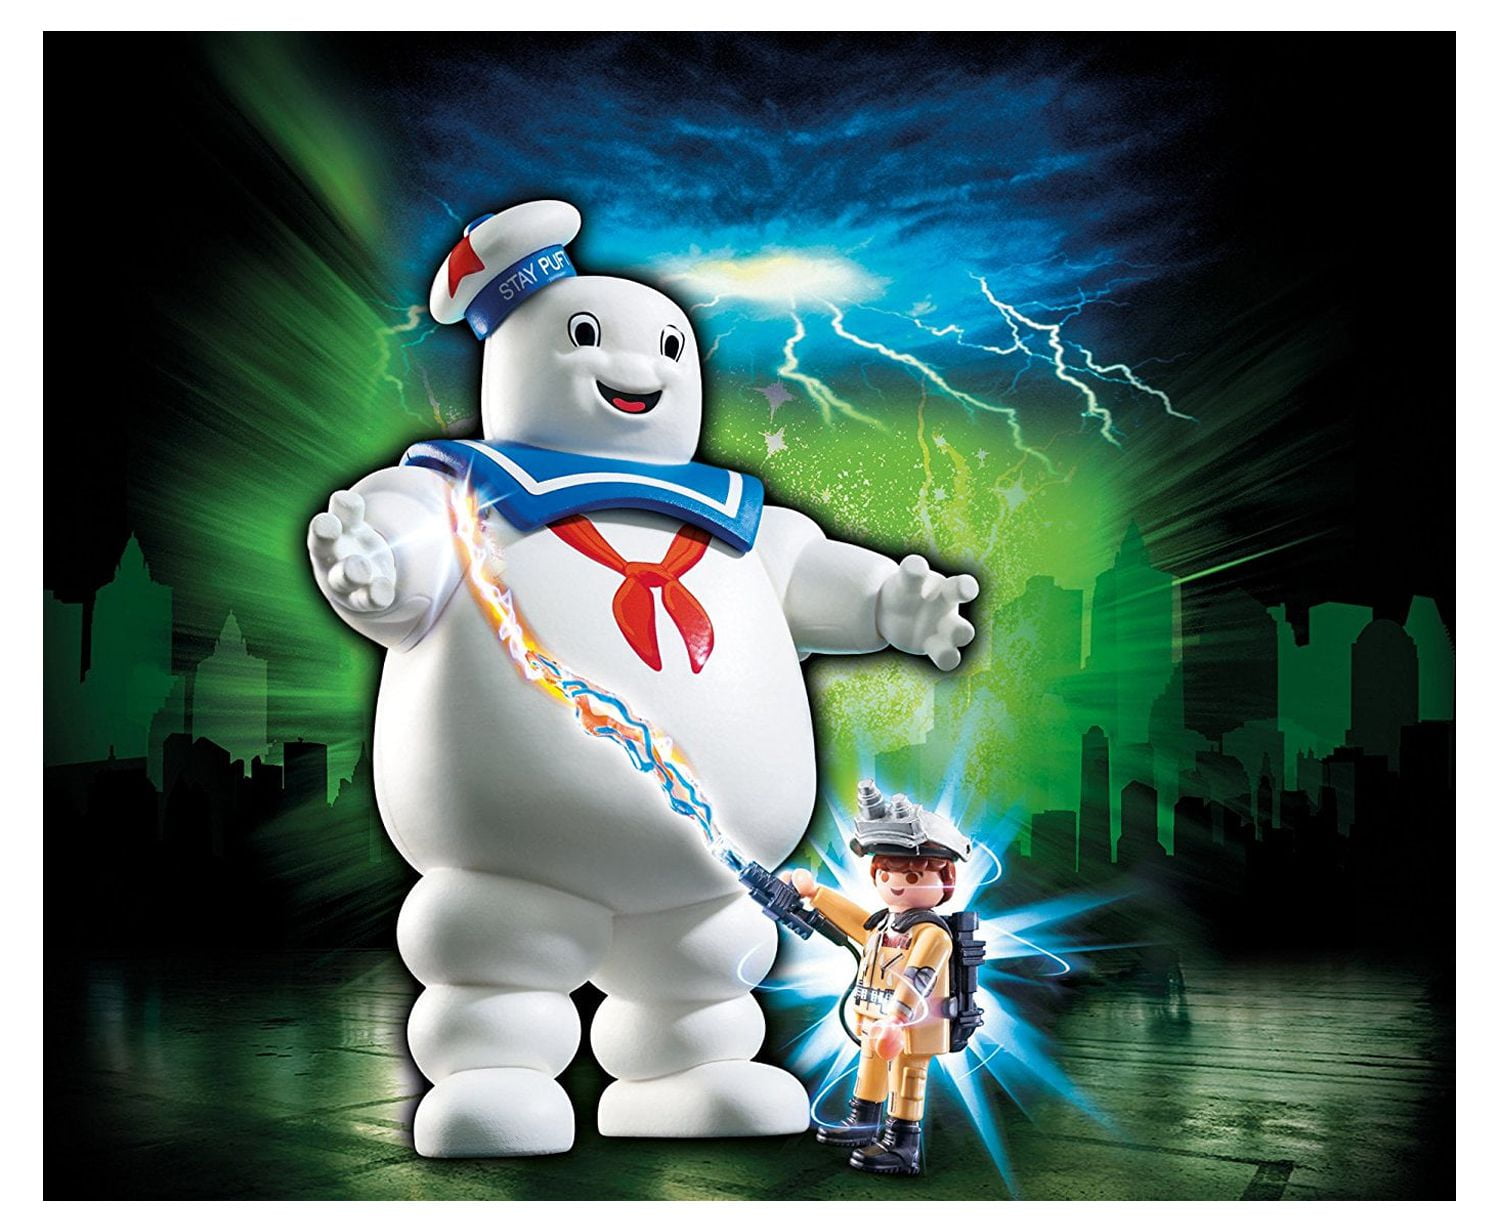 PLAYMOBIL Ghostbusters Stay Puft Marshmallow Man Action Figures